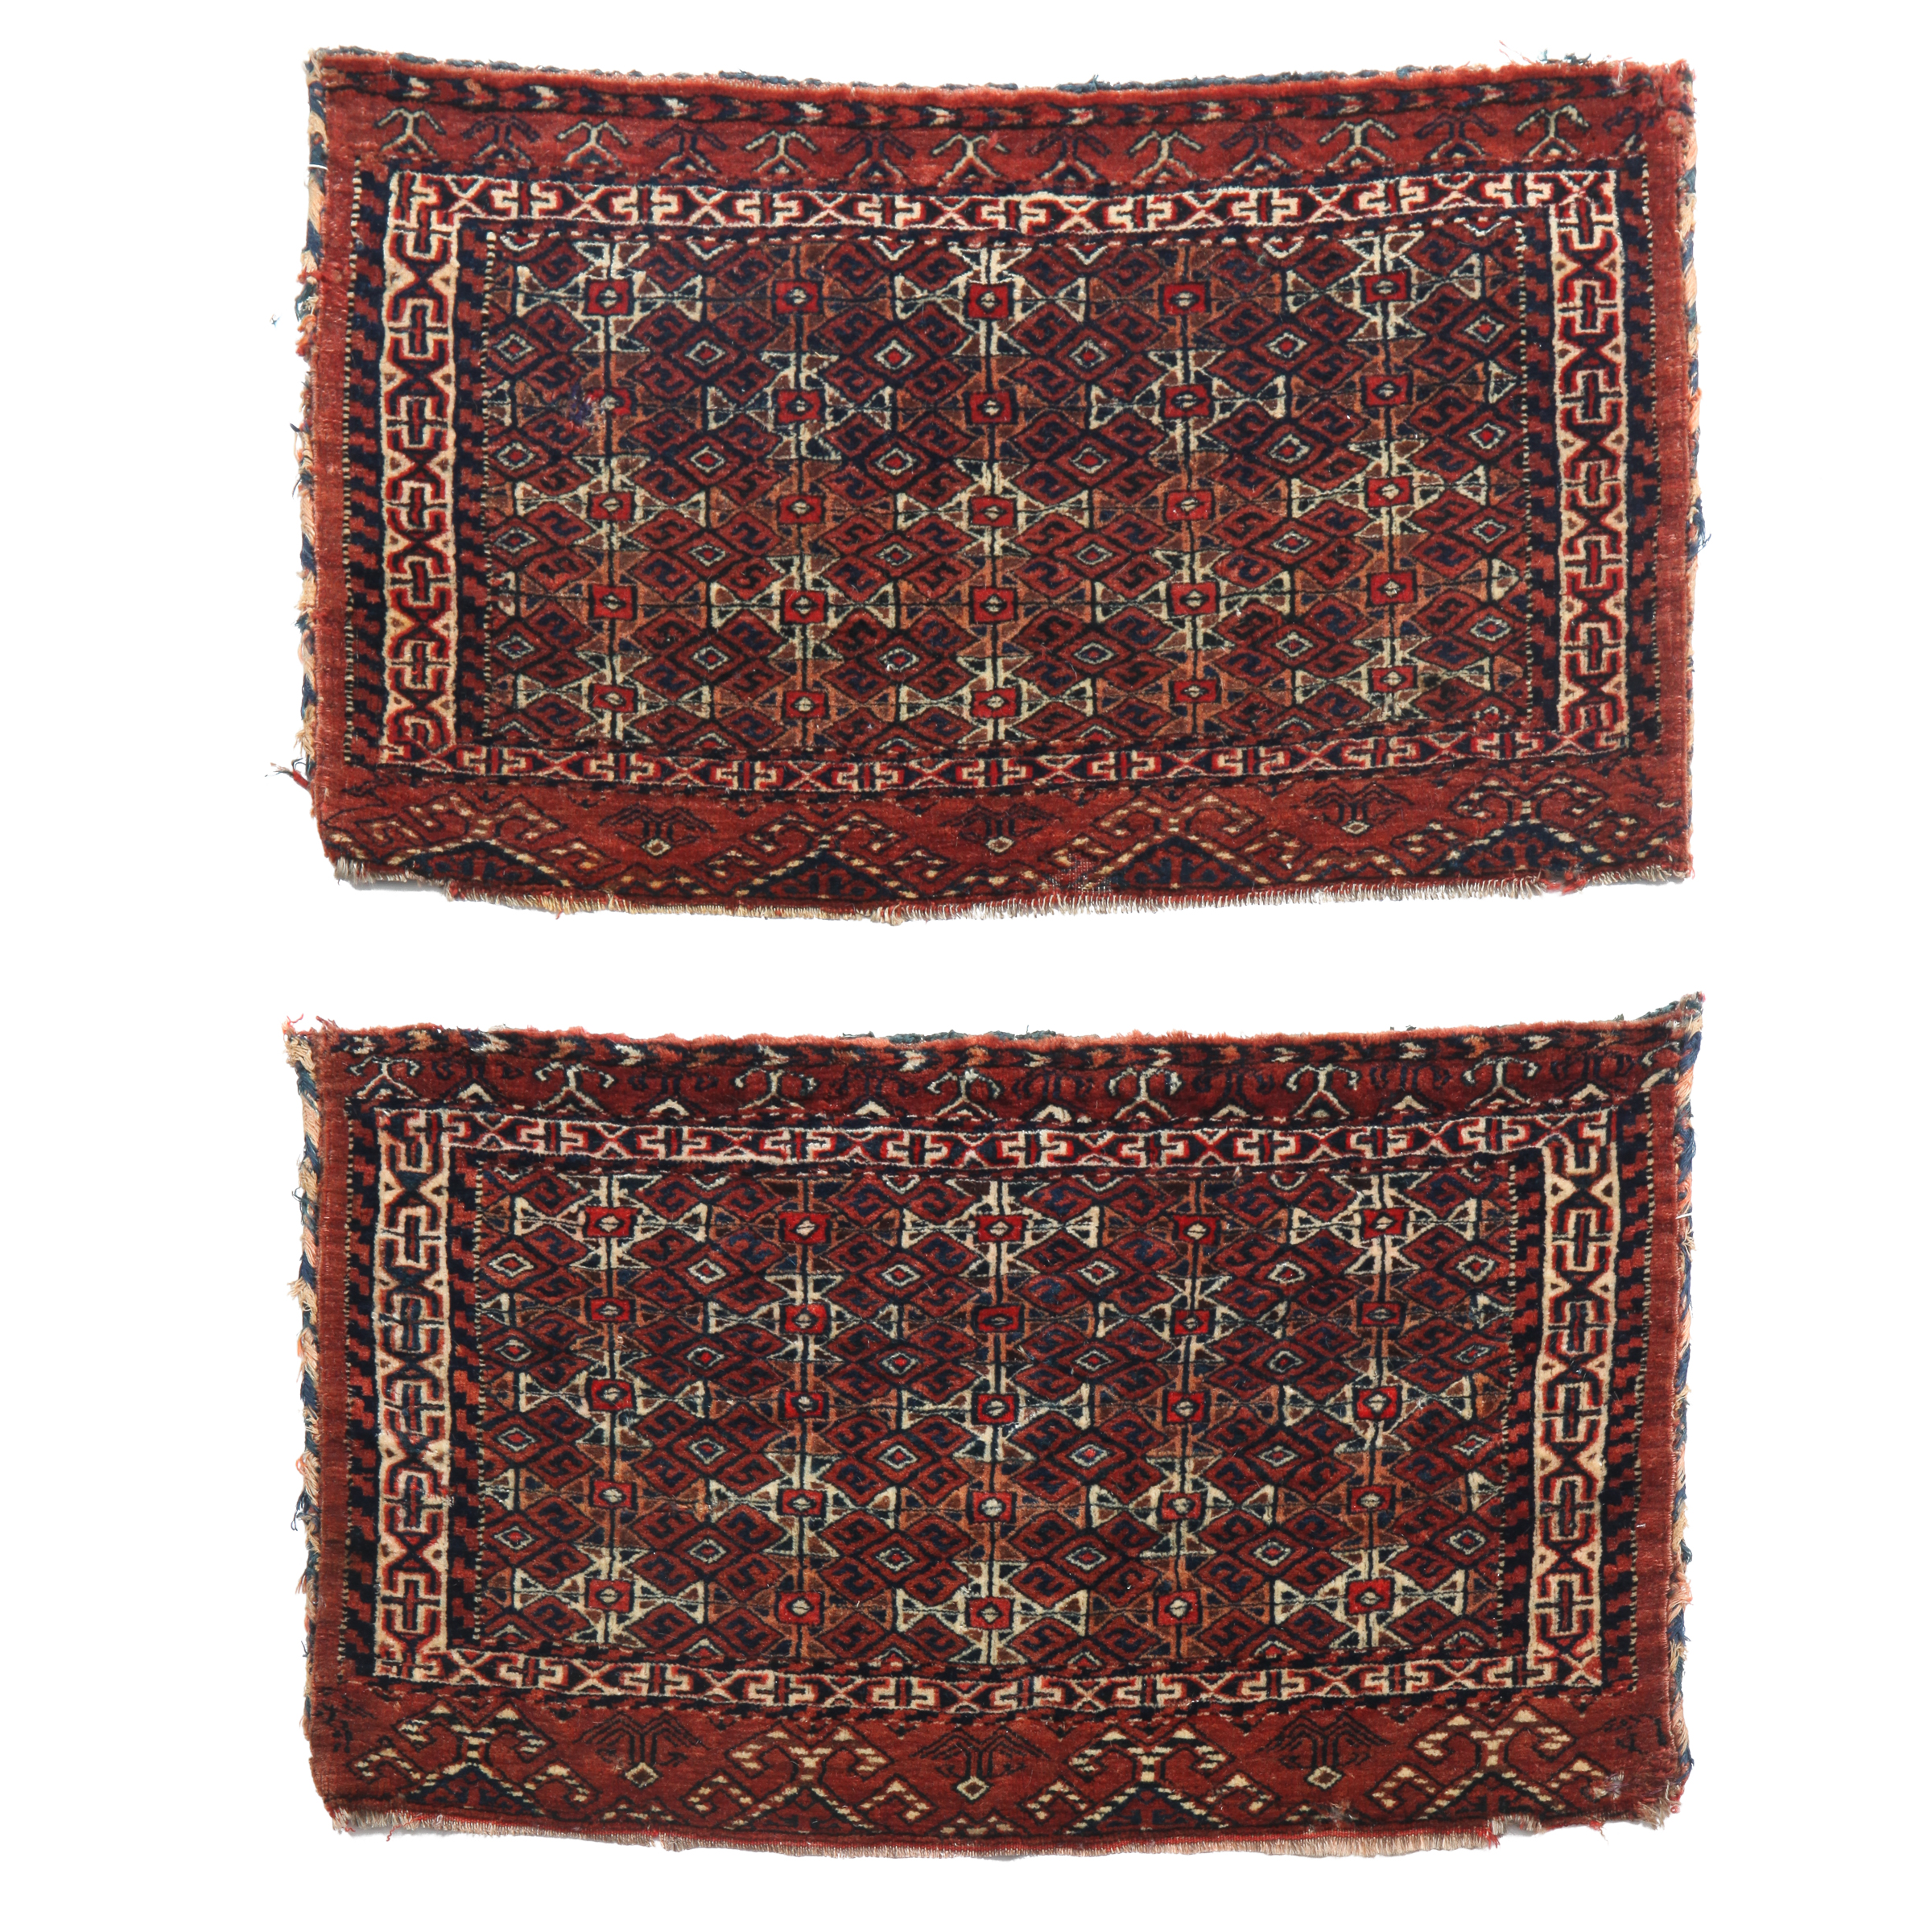 Pair of Tekke Chuvals, Central Asia, c.1900